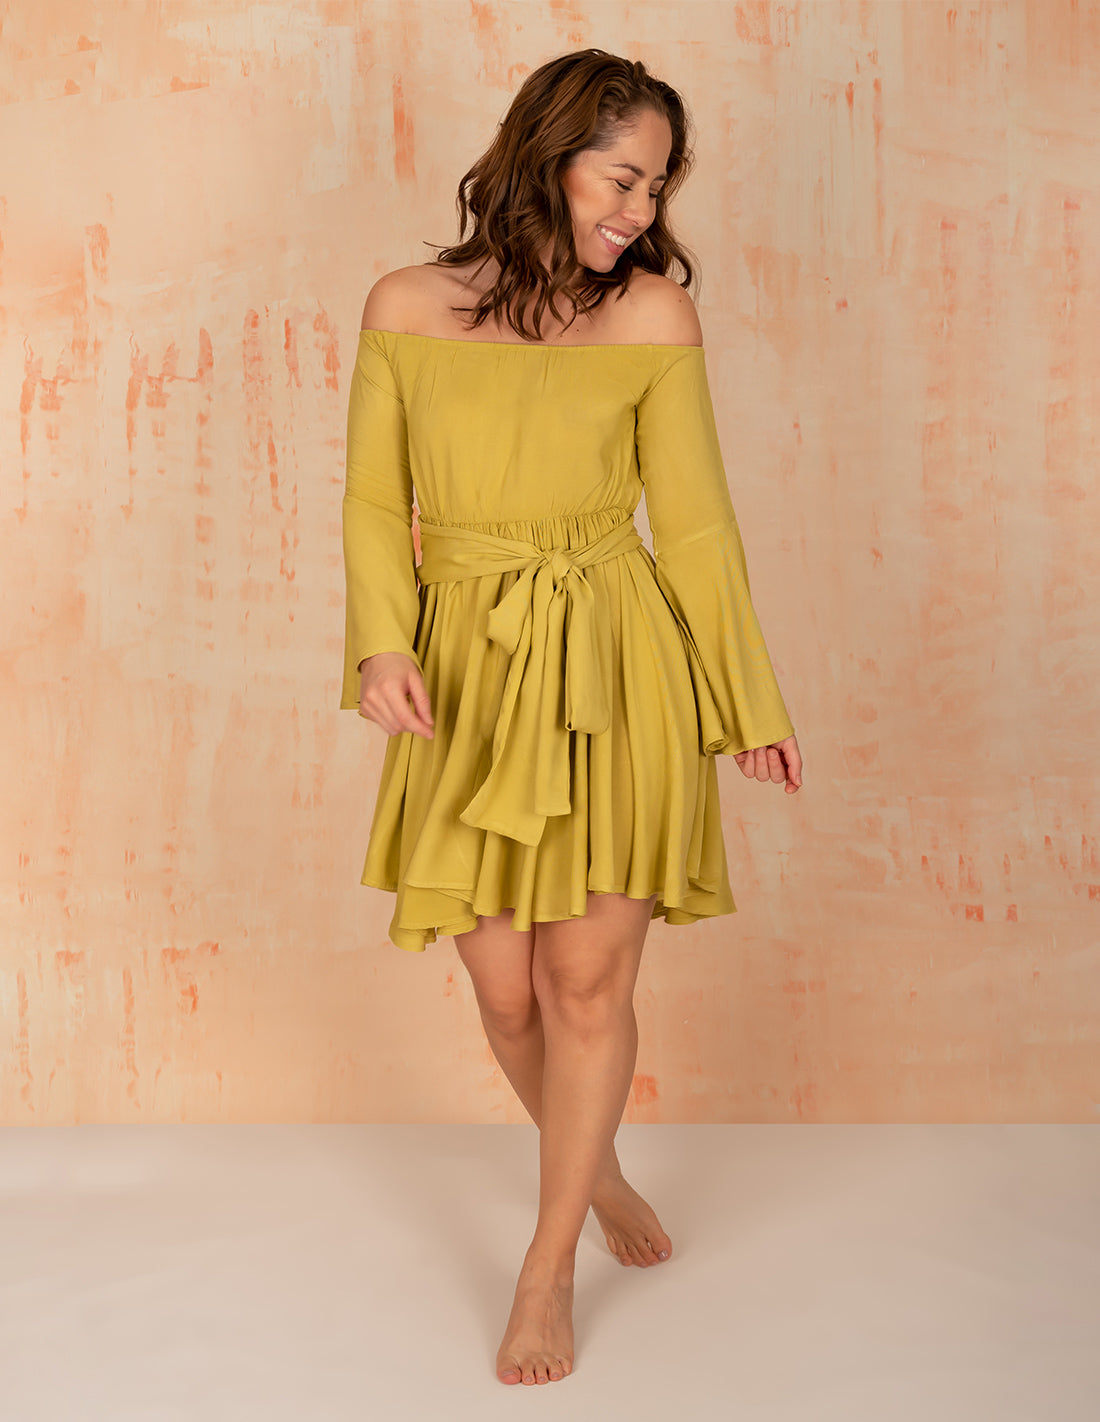 Butterfly Dress Mind Olive. Hand-Dyed Dress In Mind Olive. Entreaguas